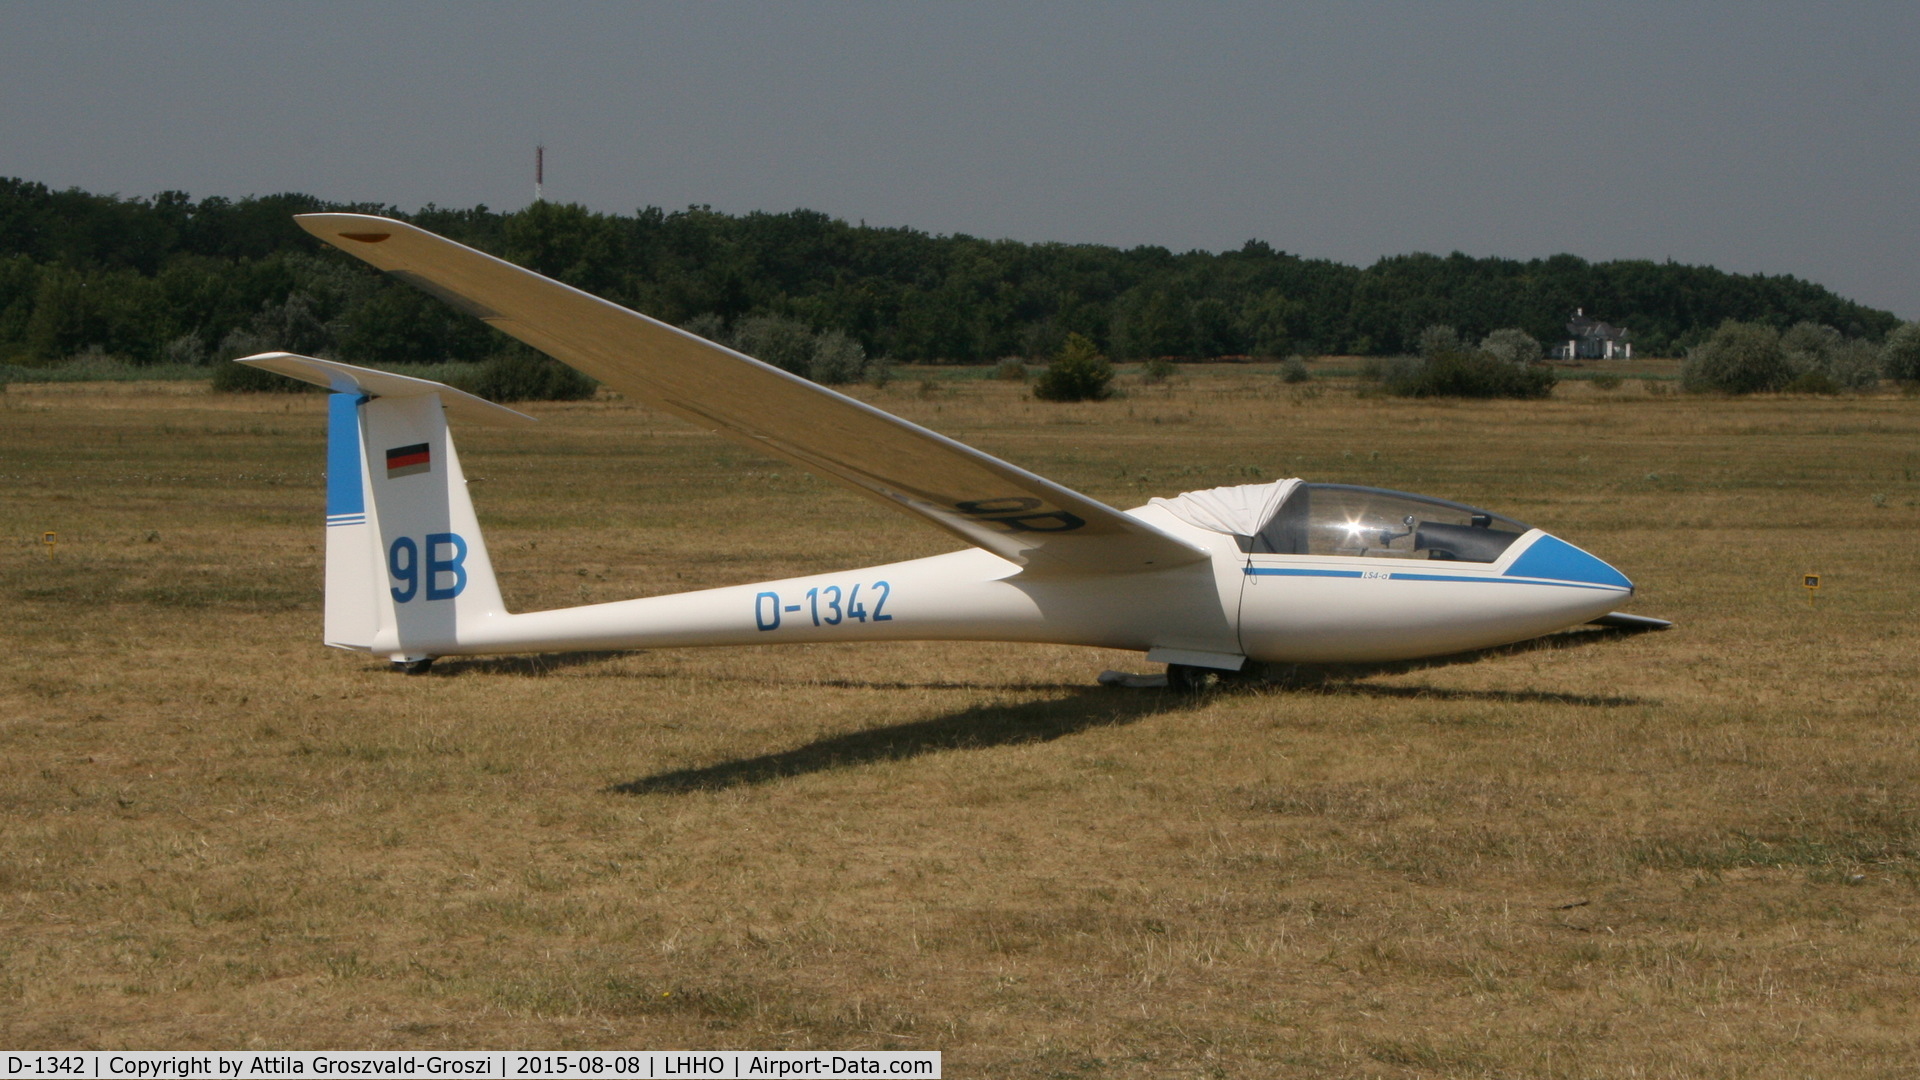 D-1342, 1987 Rolladen-Schneider LS-4A C/N 4662, Hajdúszoboszló Airport, Hungary - 60. Hungary Gliding National Championship and third Civis Thermal Cup, 2015